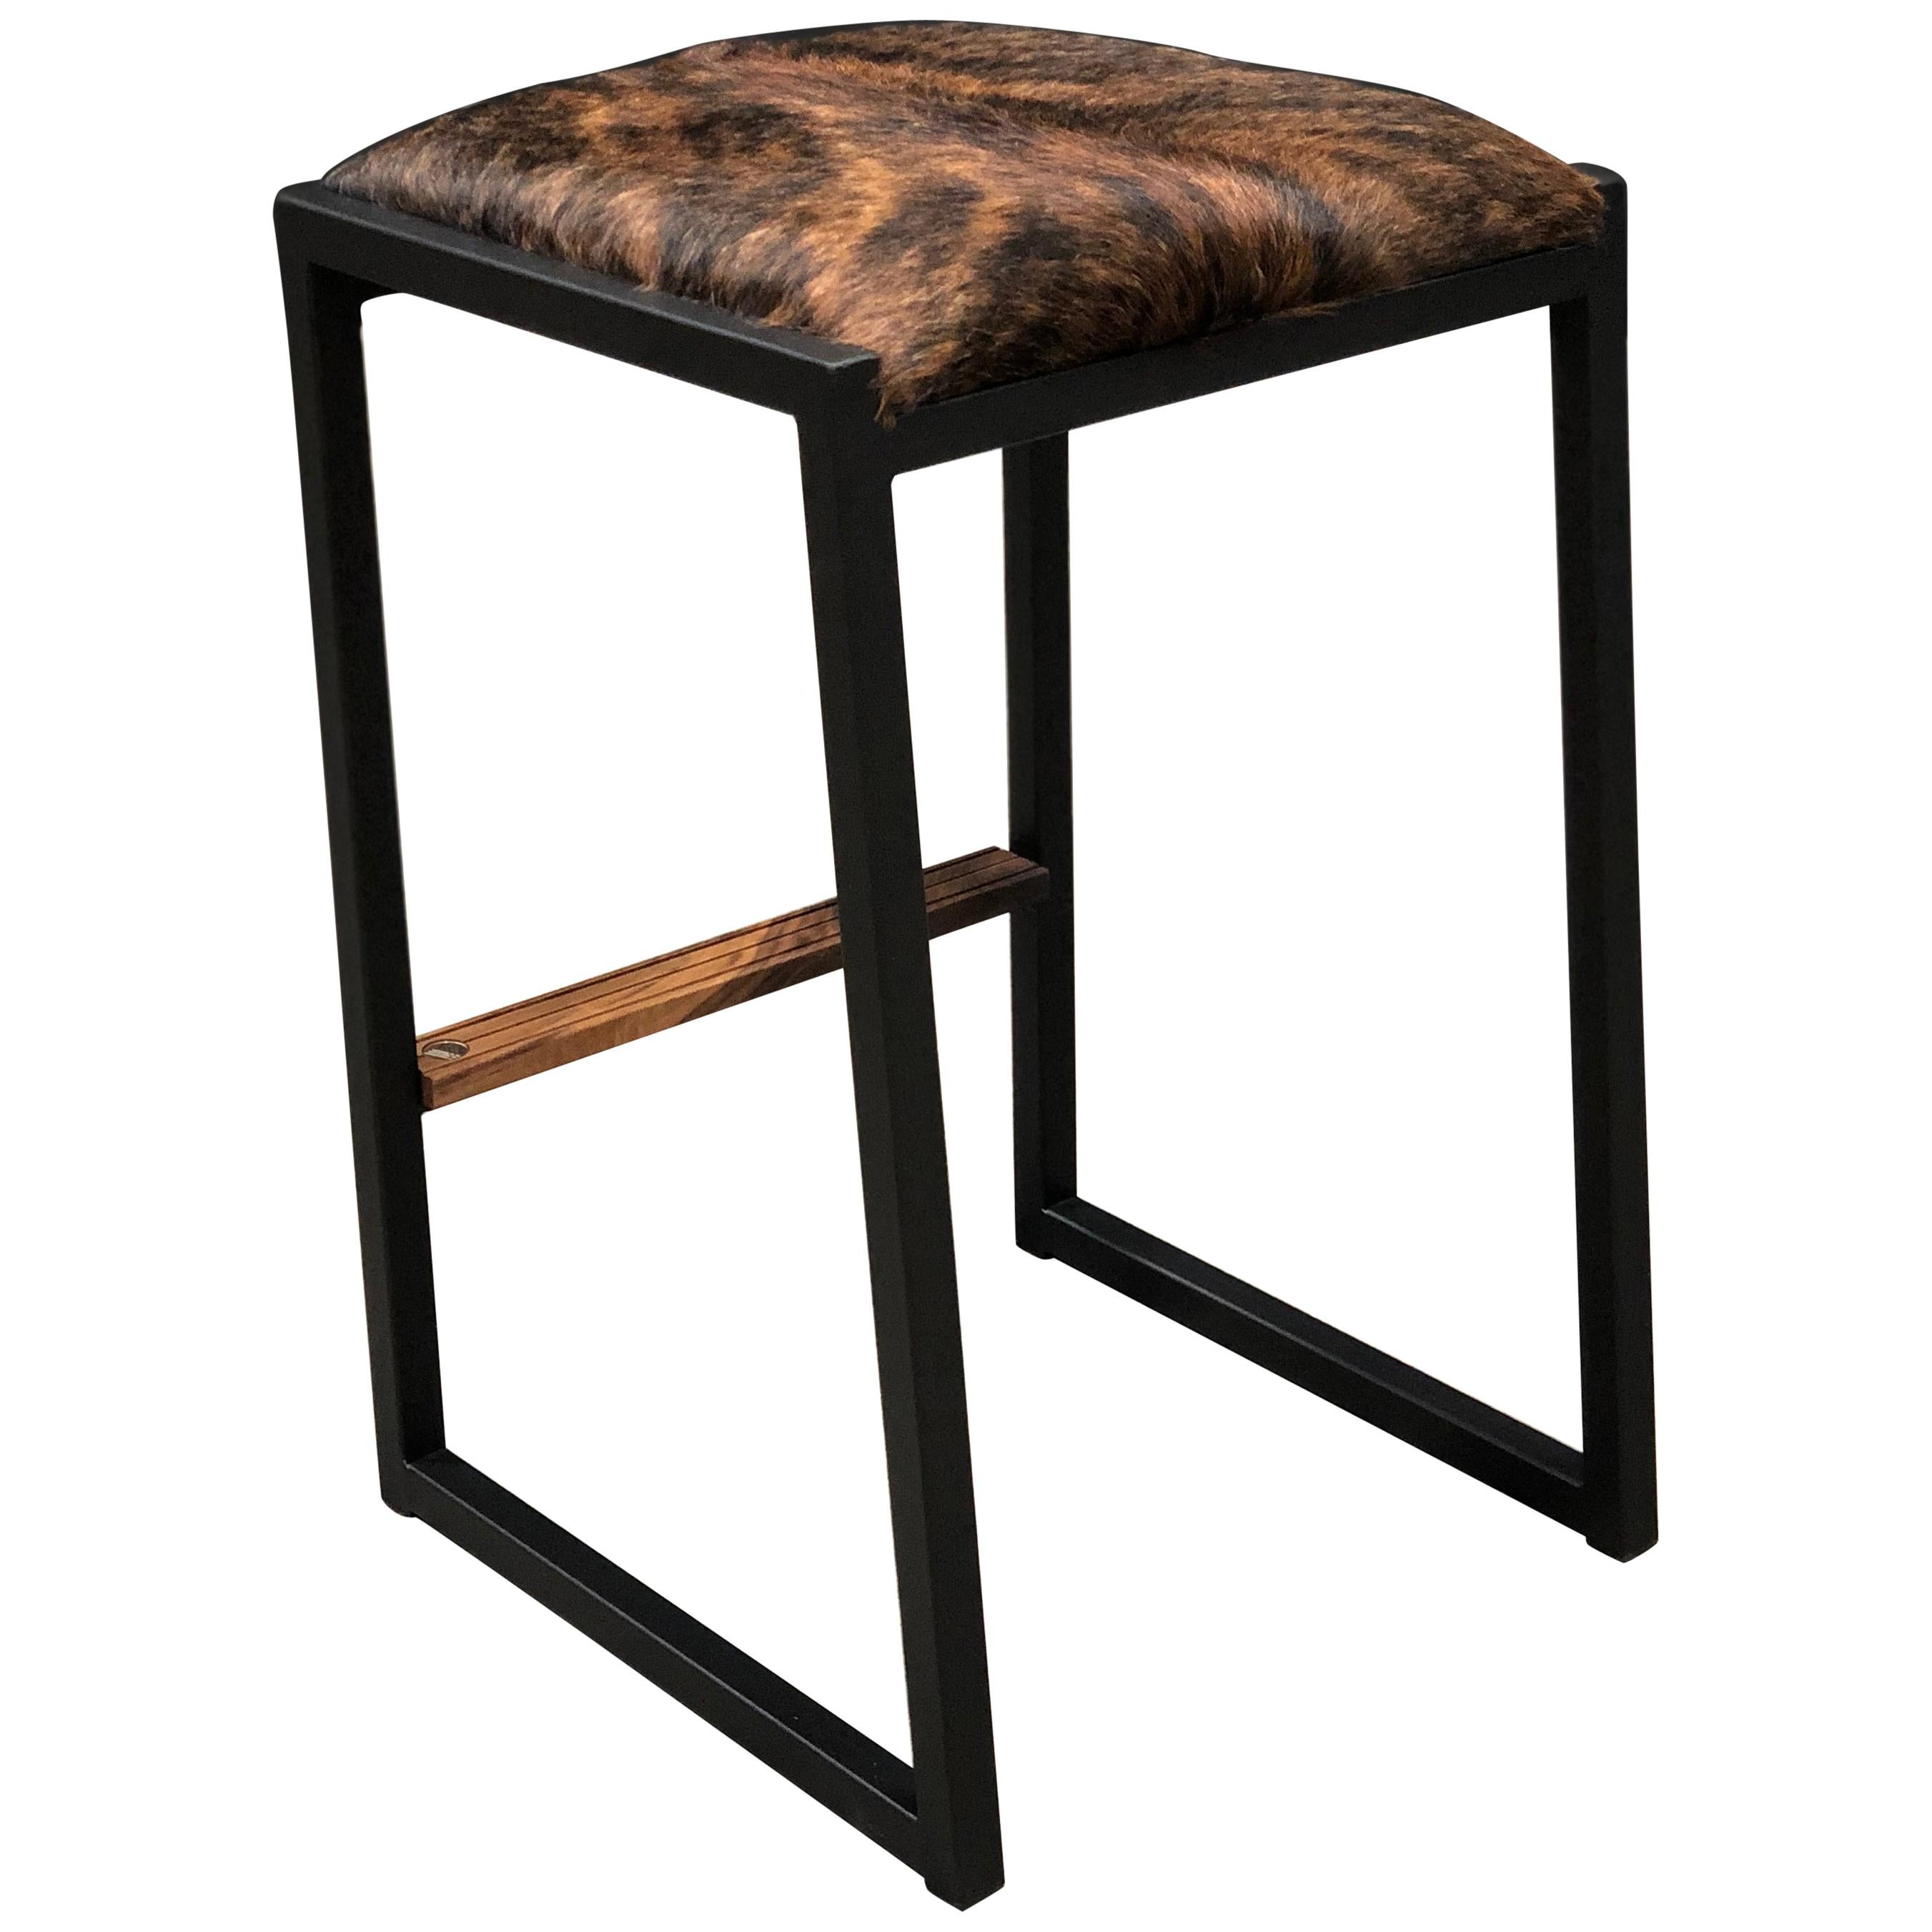 Shaker Backless Counter Stool by Ambrozia, Walnut, Steel, Brown Brindle Cowhide